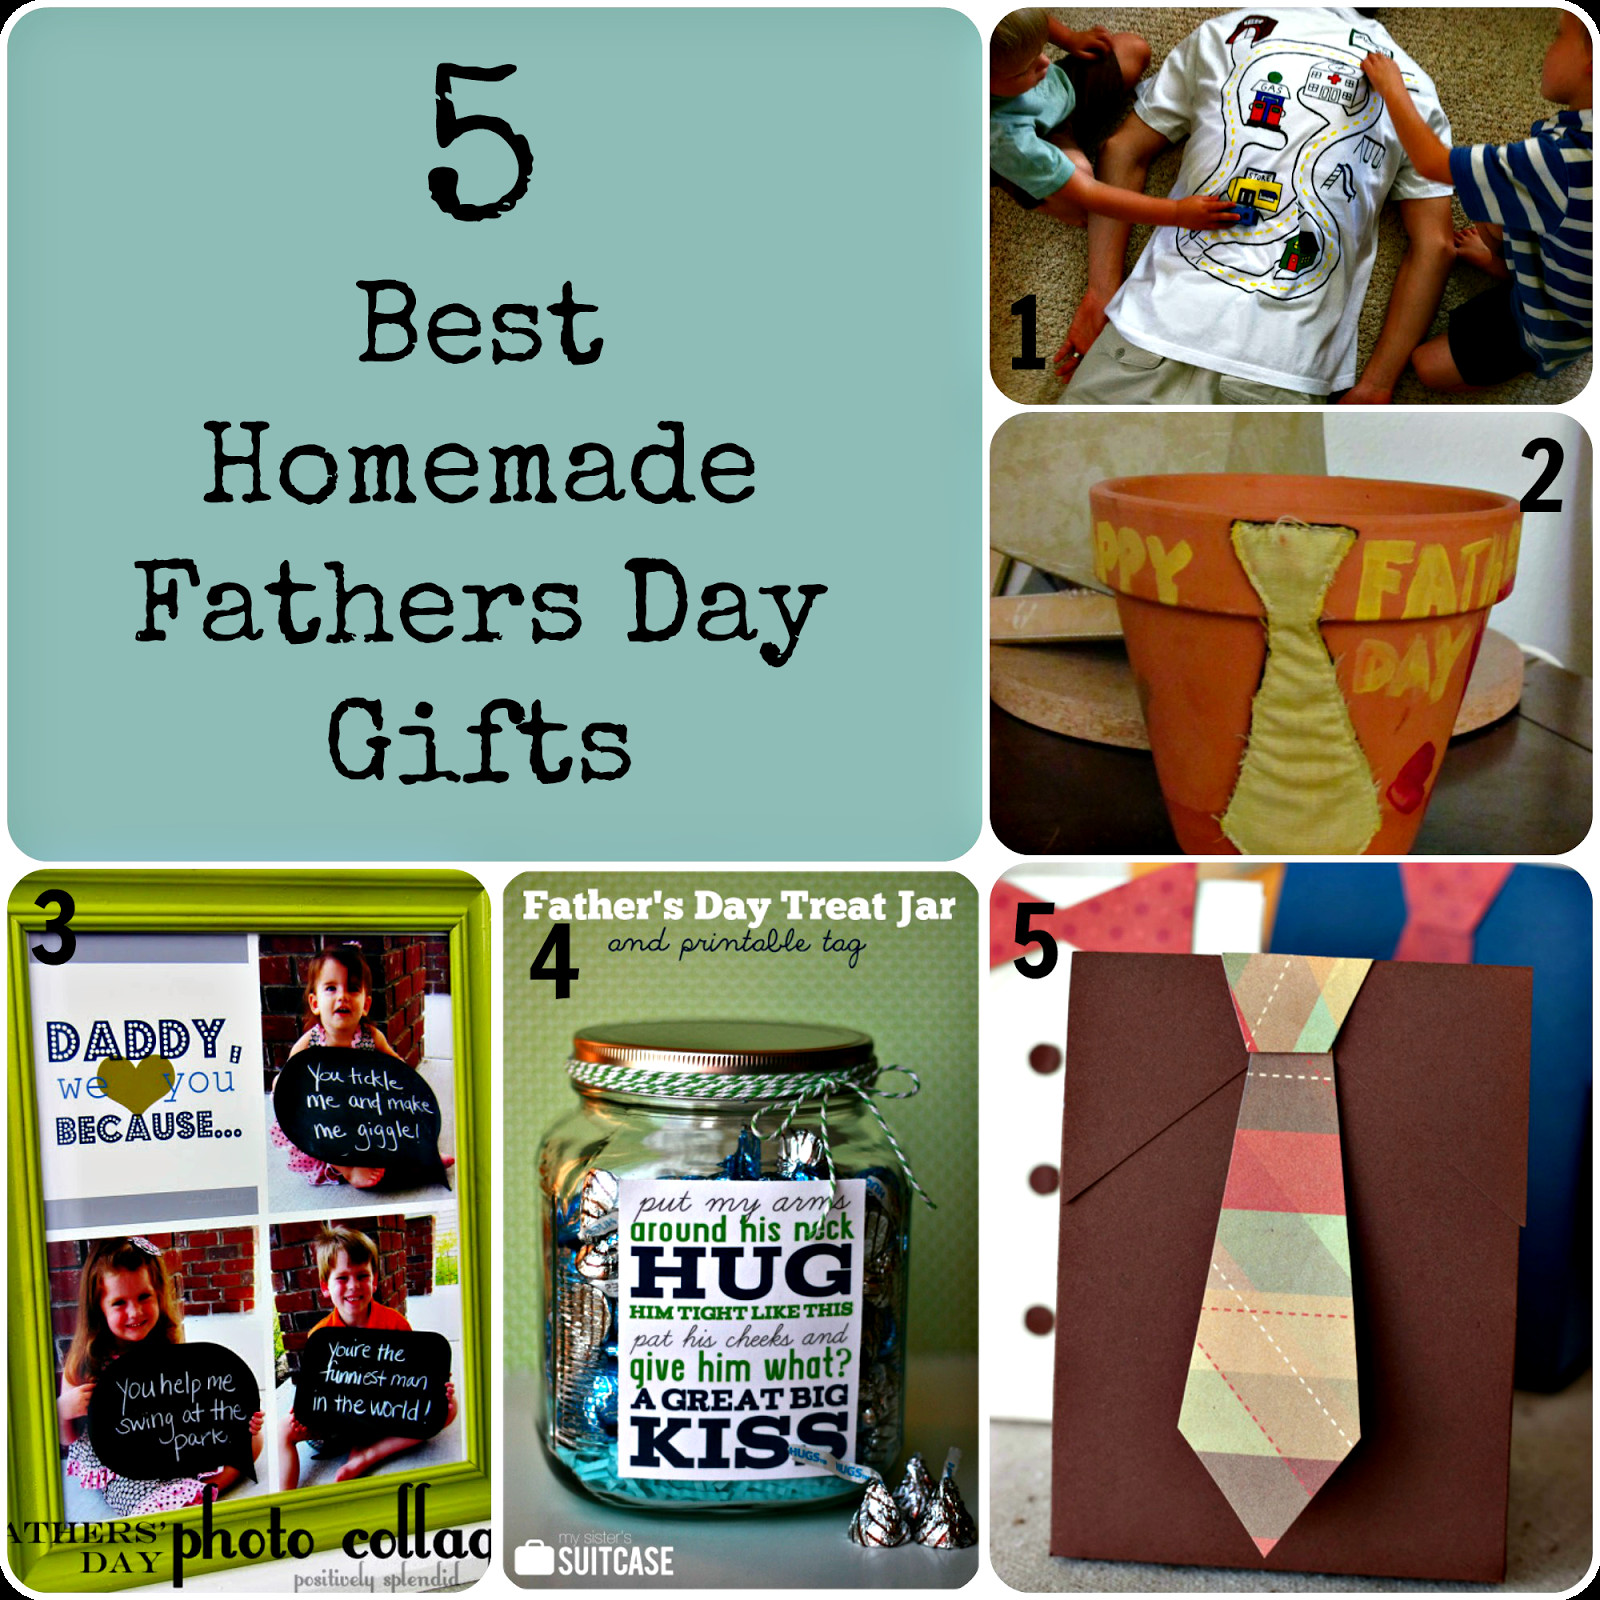 Homemade Birthday Gift Ideas For Dad From Daughter
 5 Best homemade Fathers Day Gifts